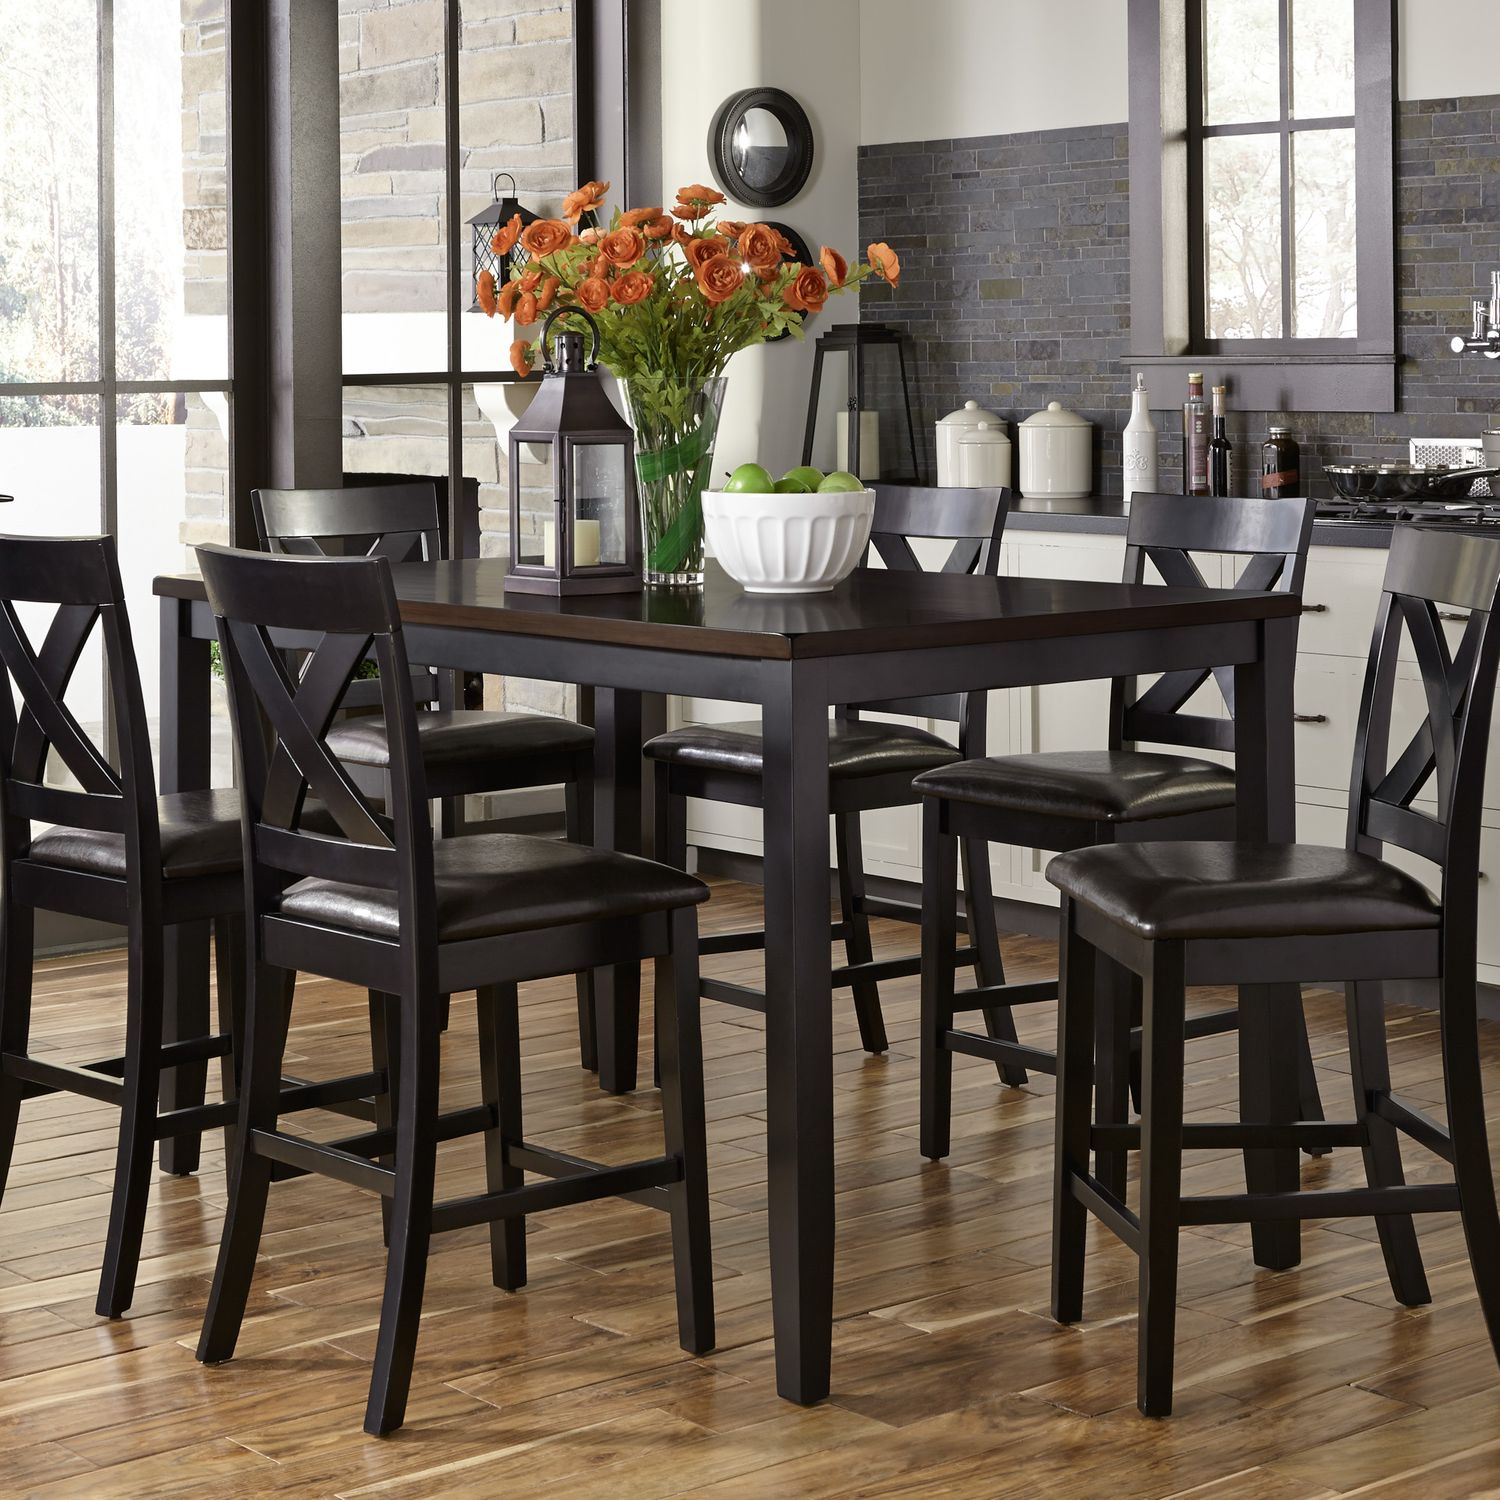 Thornton 7 Piece Gathering Table Set Black Counter Height